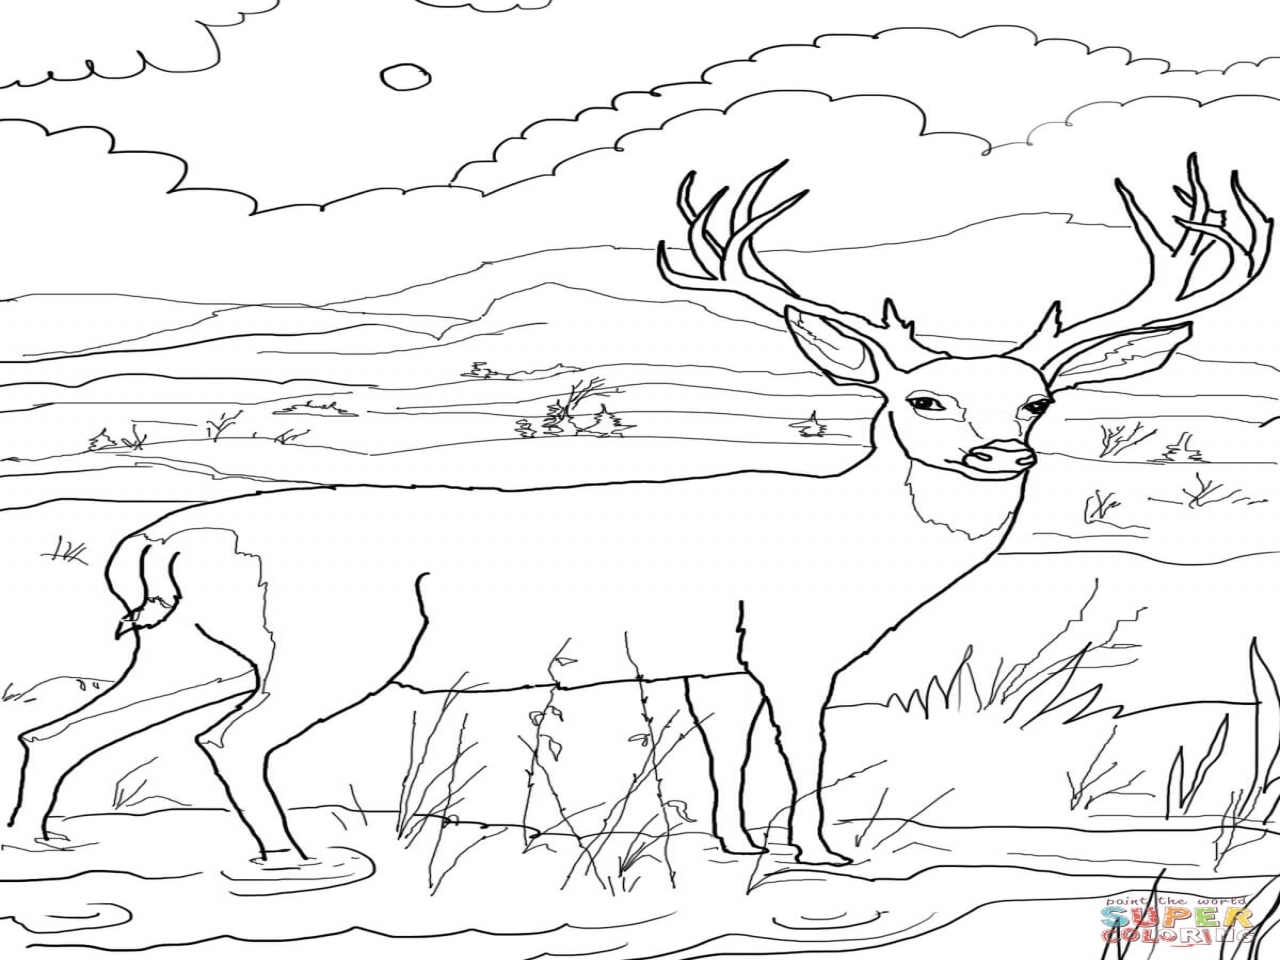 Caribou Coloring Pages at GetColorings.com | Free printable colorings